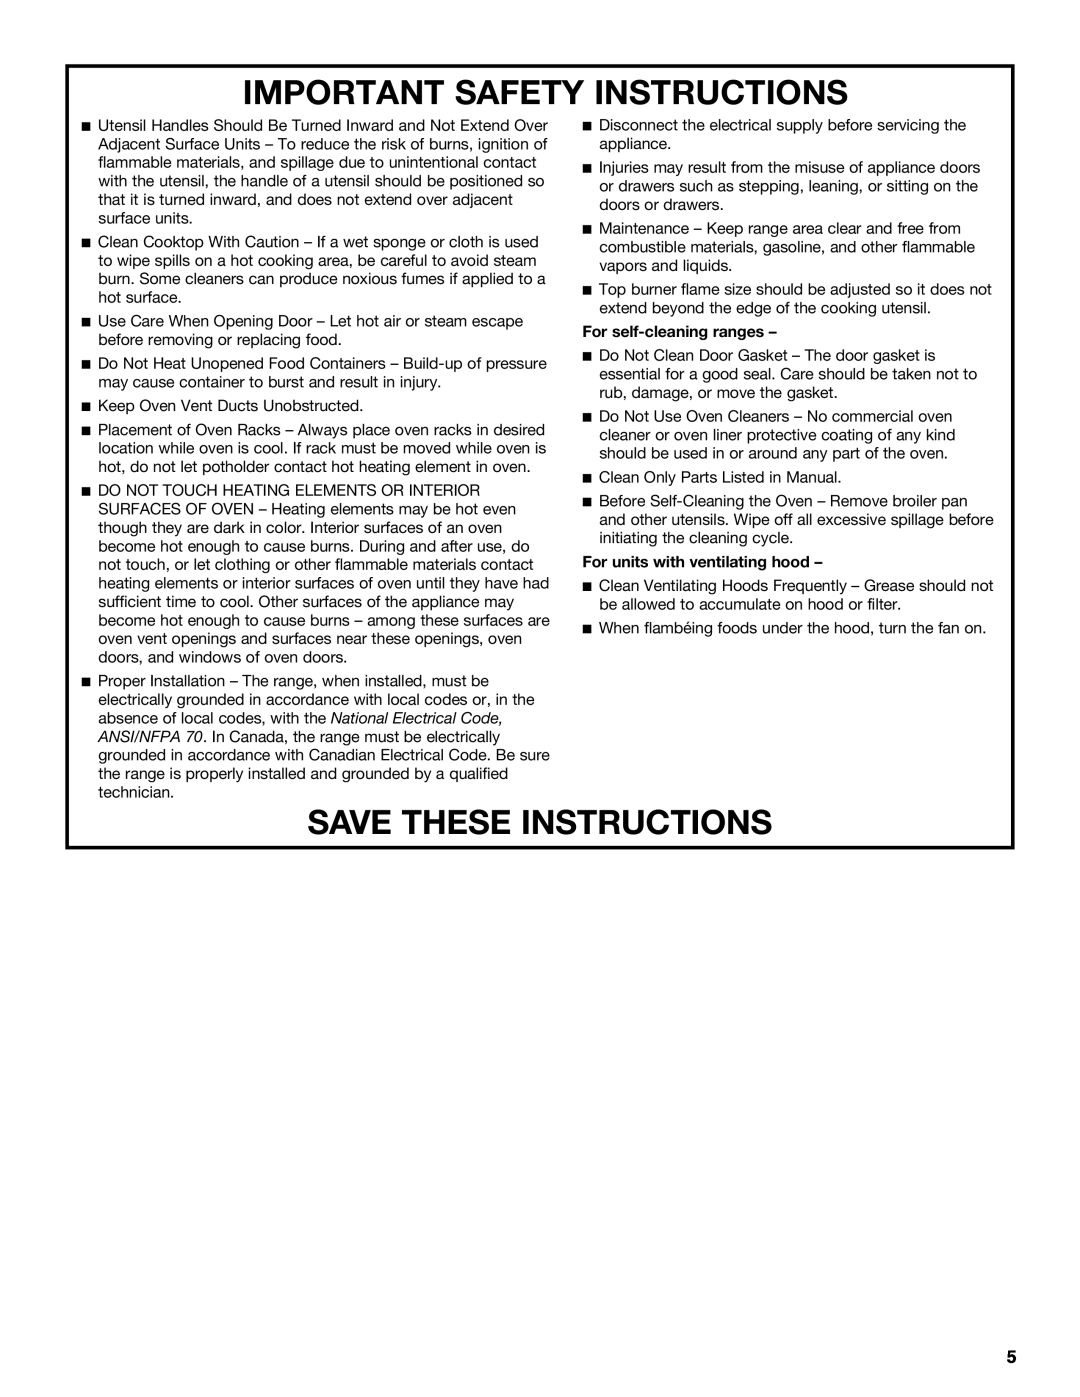 Jenn-Air JDRP536, JDRP436, JDRP430, JDRP548 Important Safety Instructions, Save These Instructions, For self-cleaning ranges 